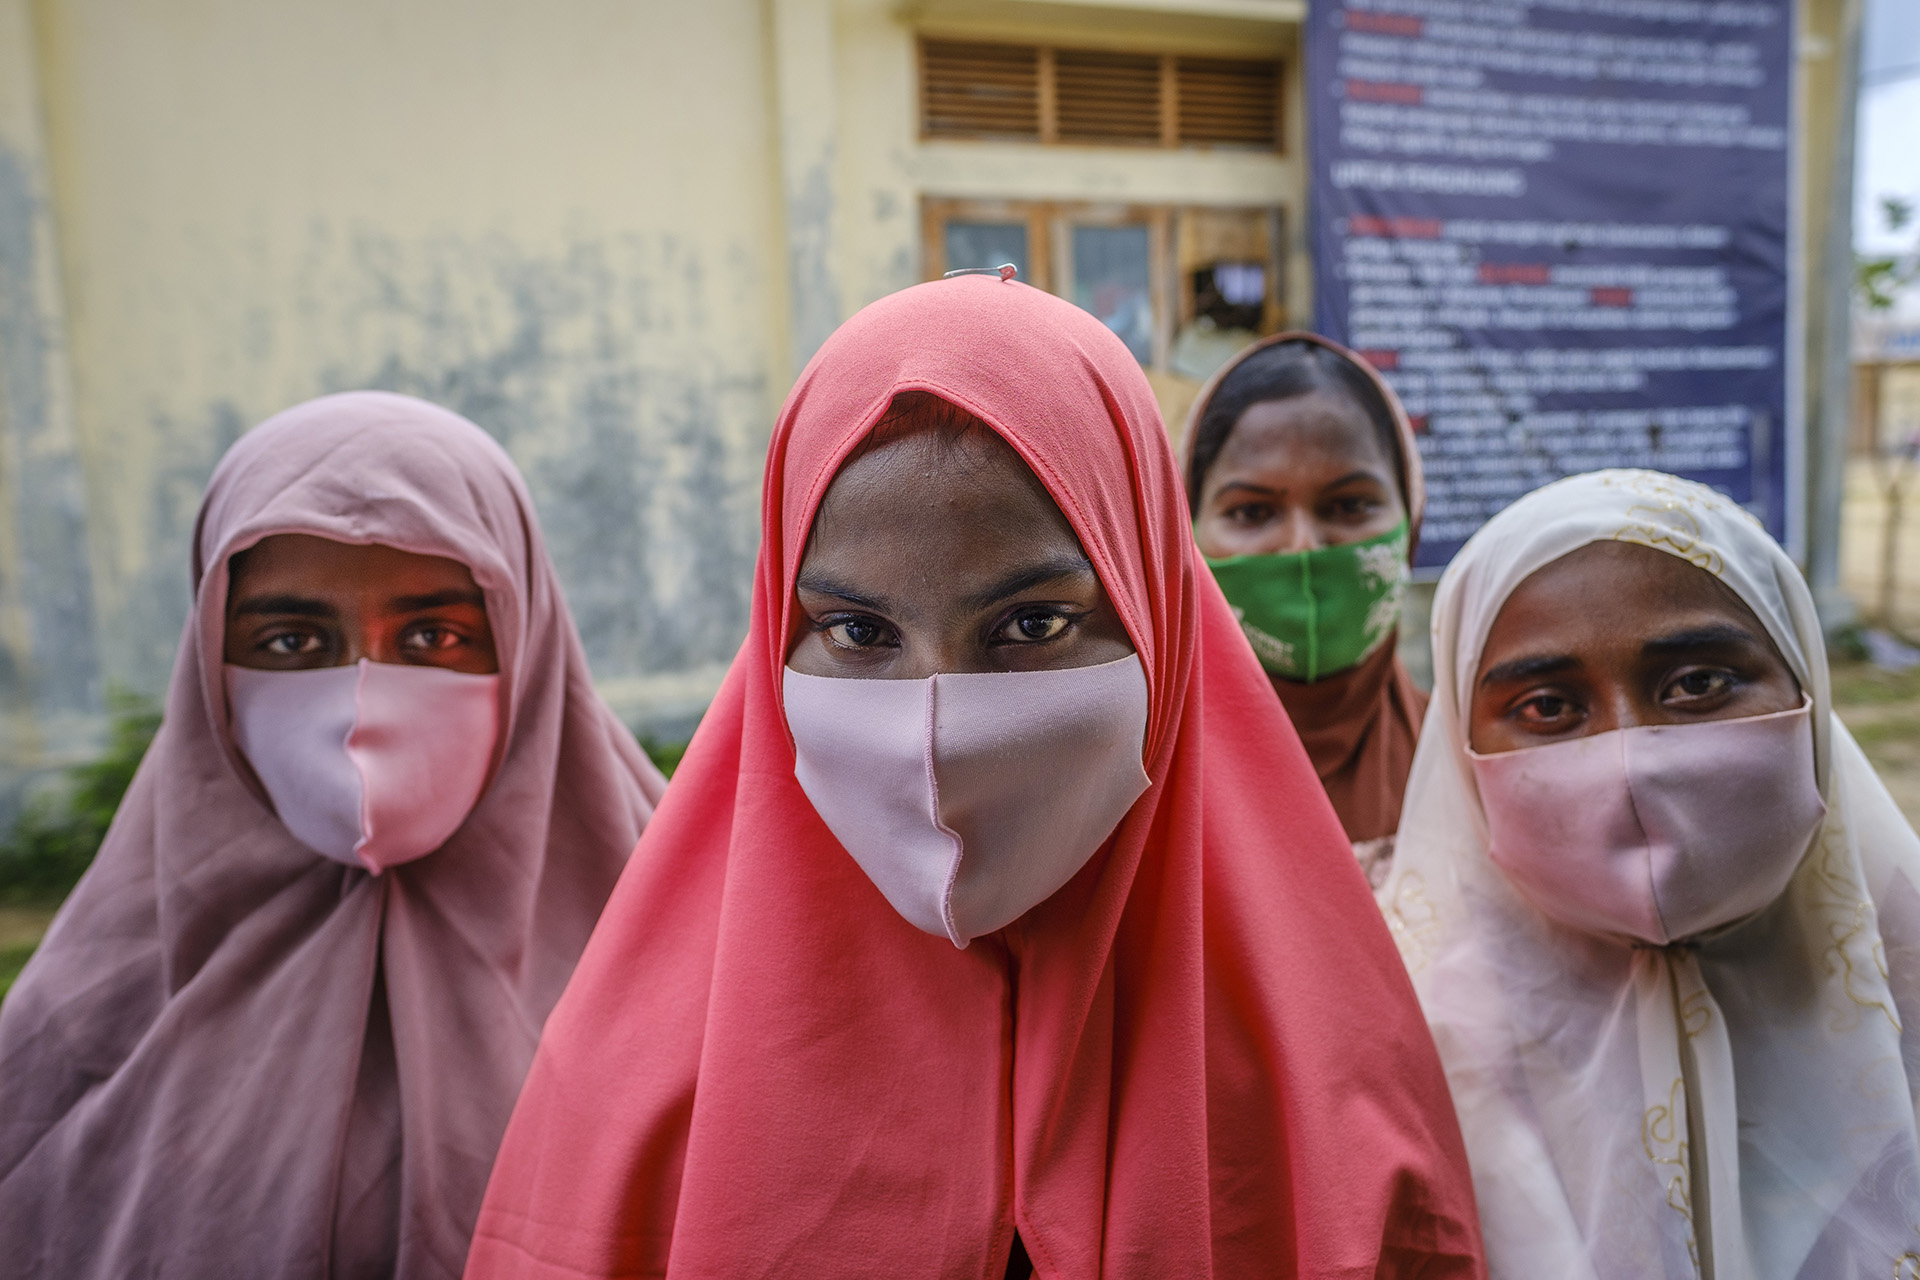 A female refugee wearing a salmon-colored shawl and a pink face mask looks at the camera, with a few fellow refugees in the background.